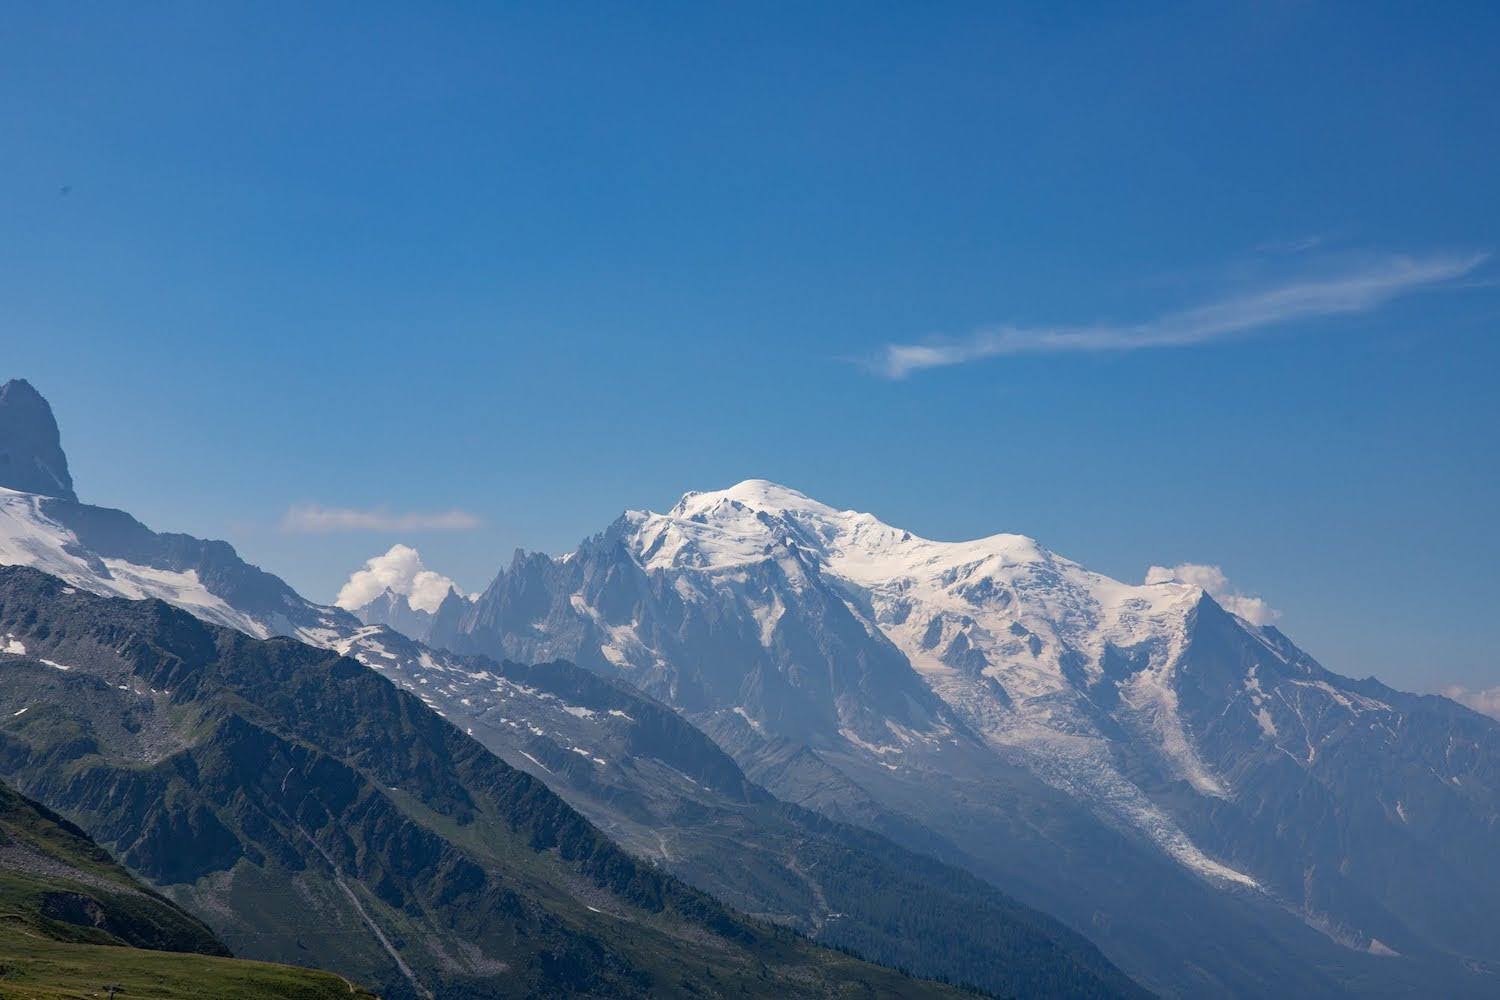 The most wonderful point of view when hiking around Mont Blanc